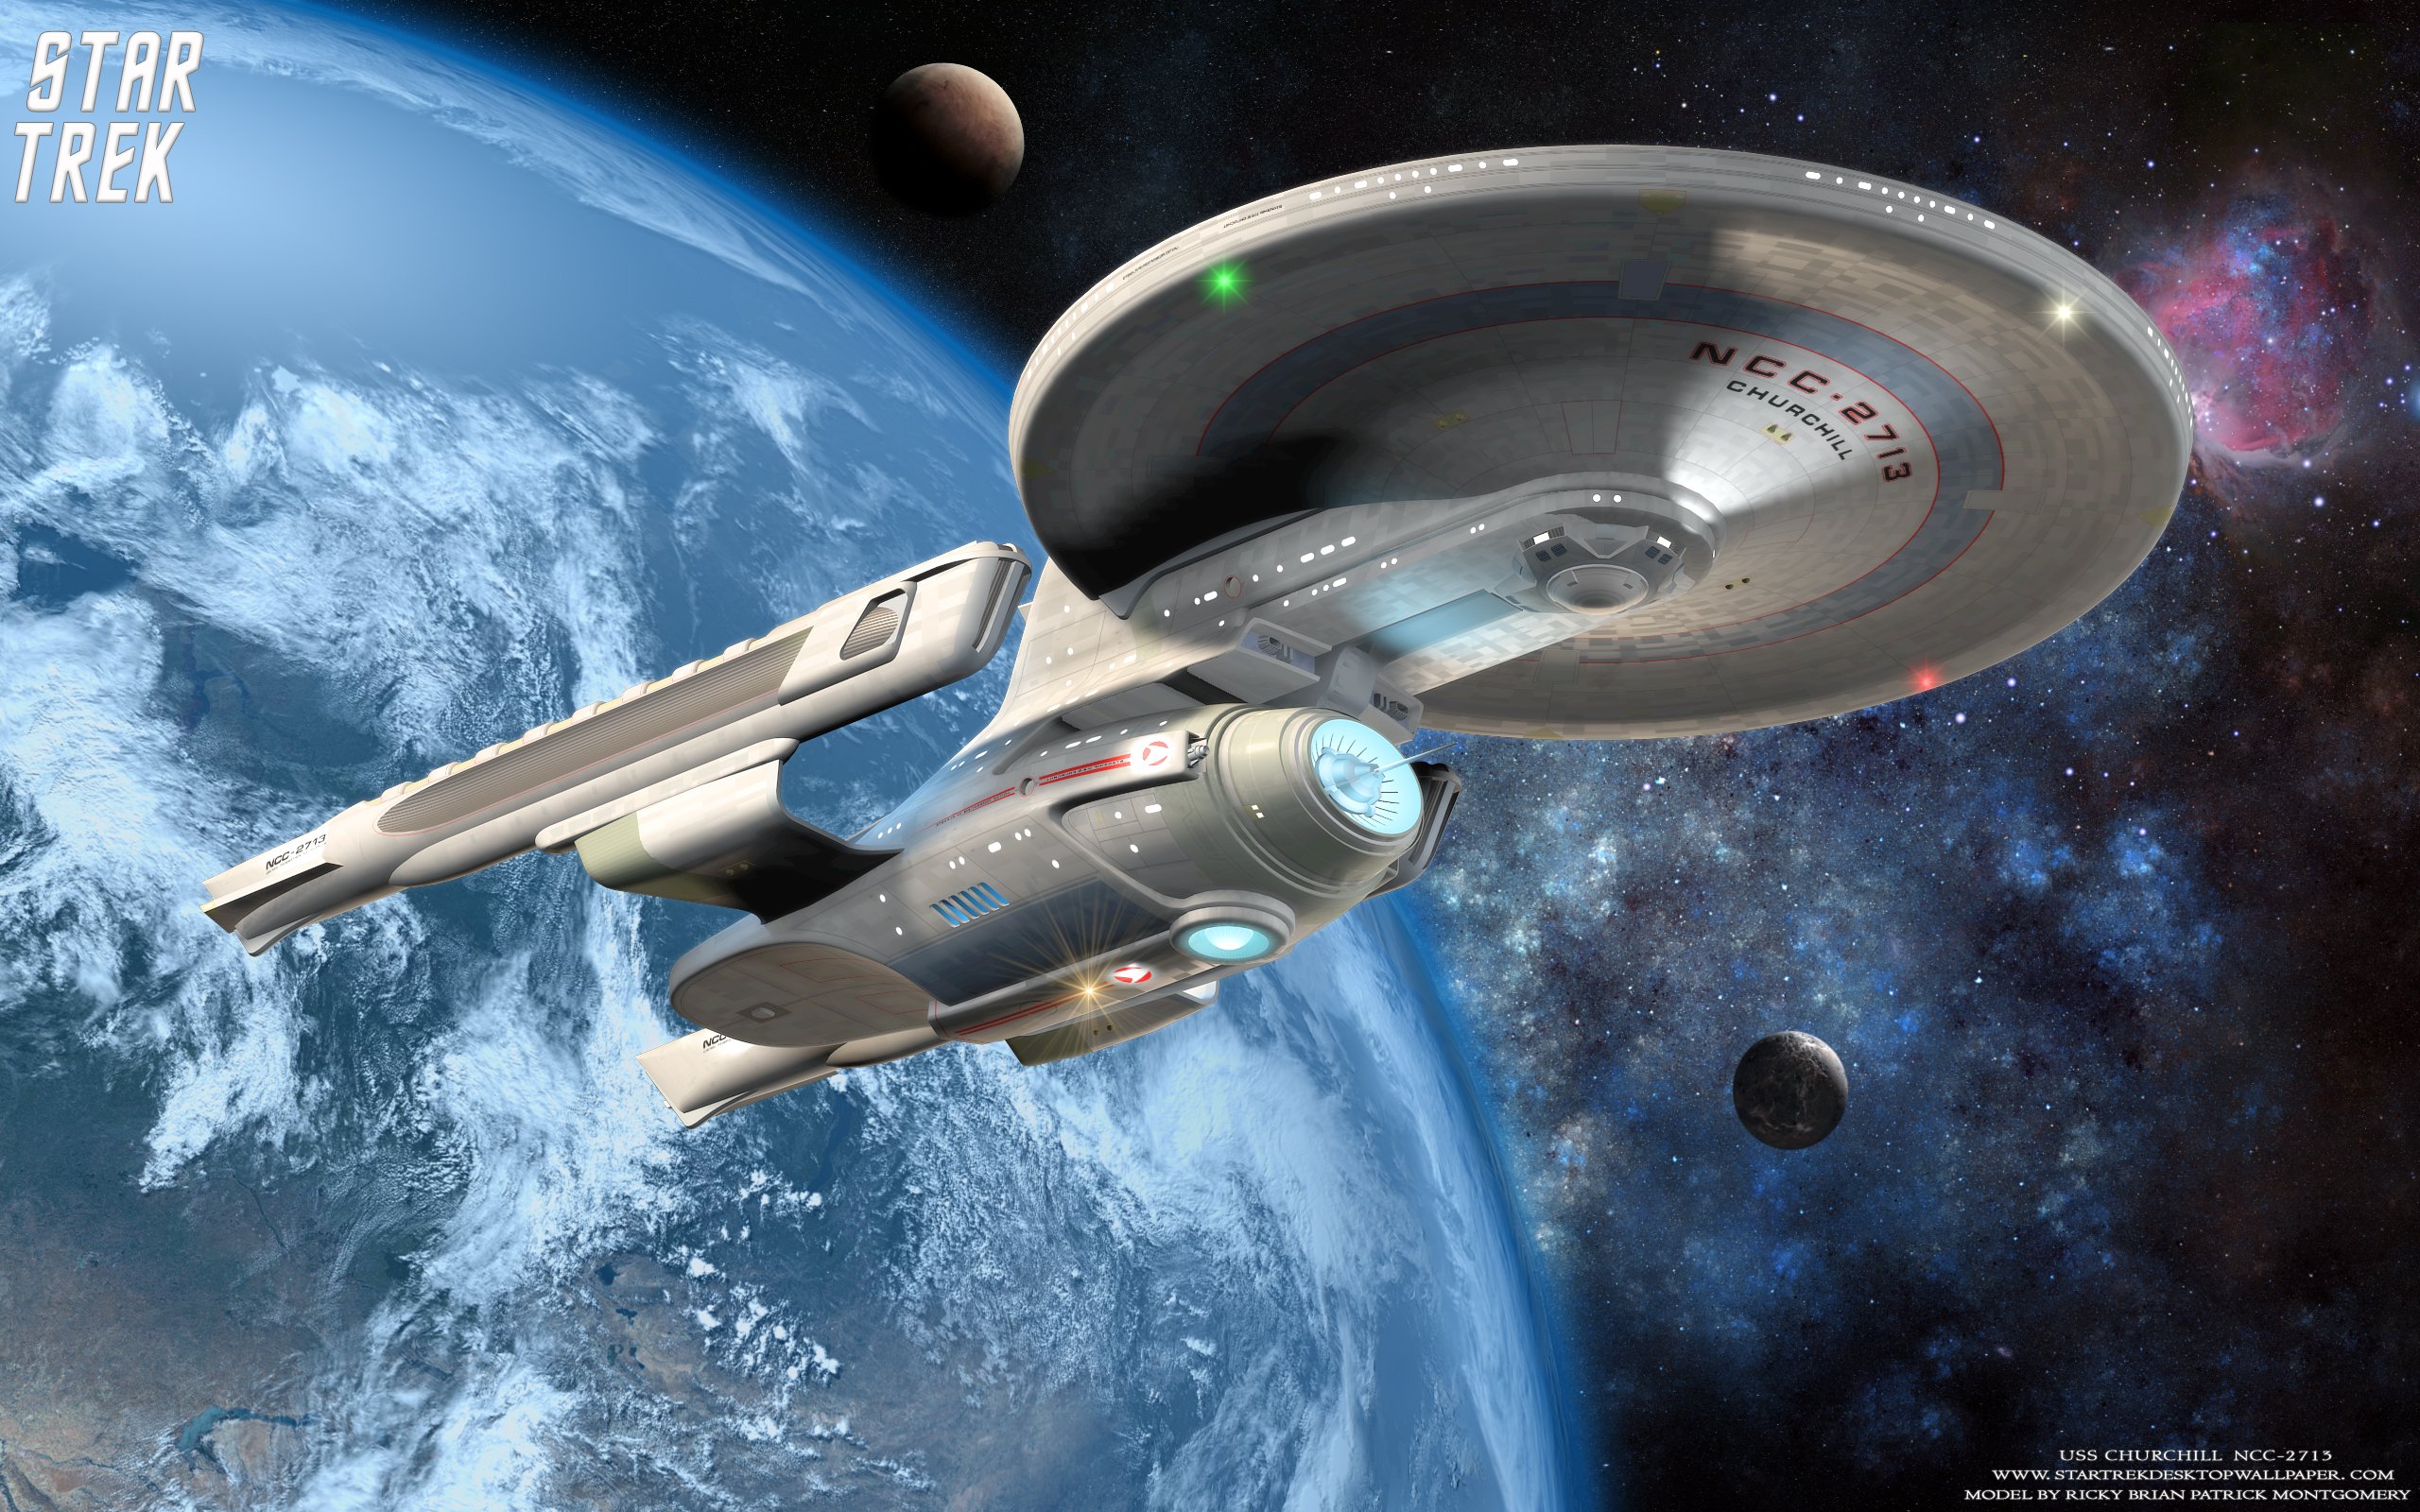 Startrek 4K wallpaper for your desktop or mobile screen free and easy to download